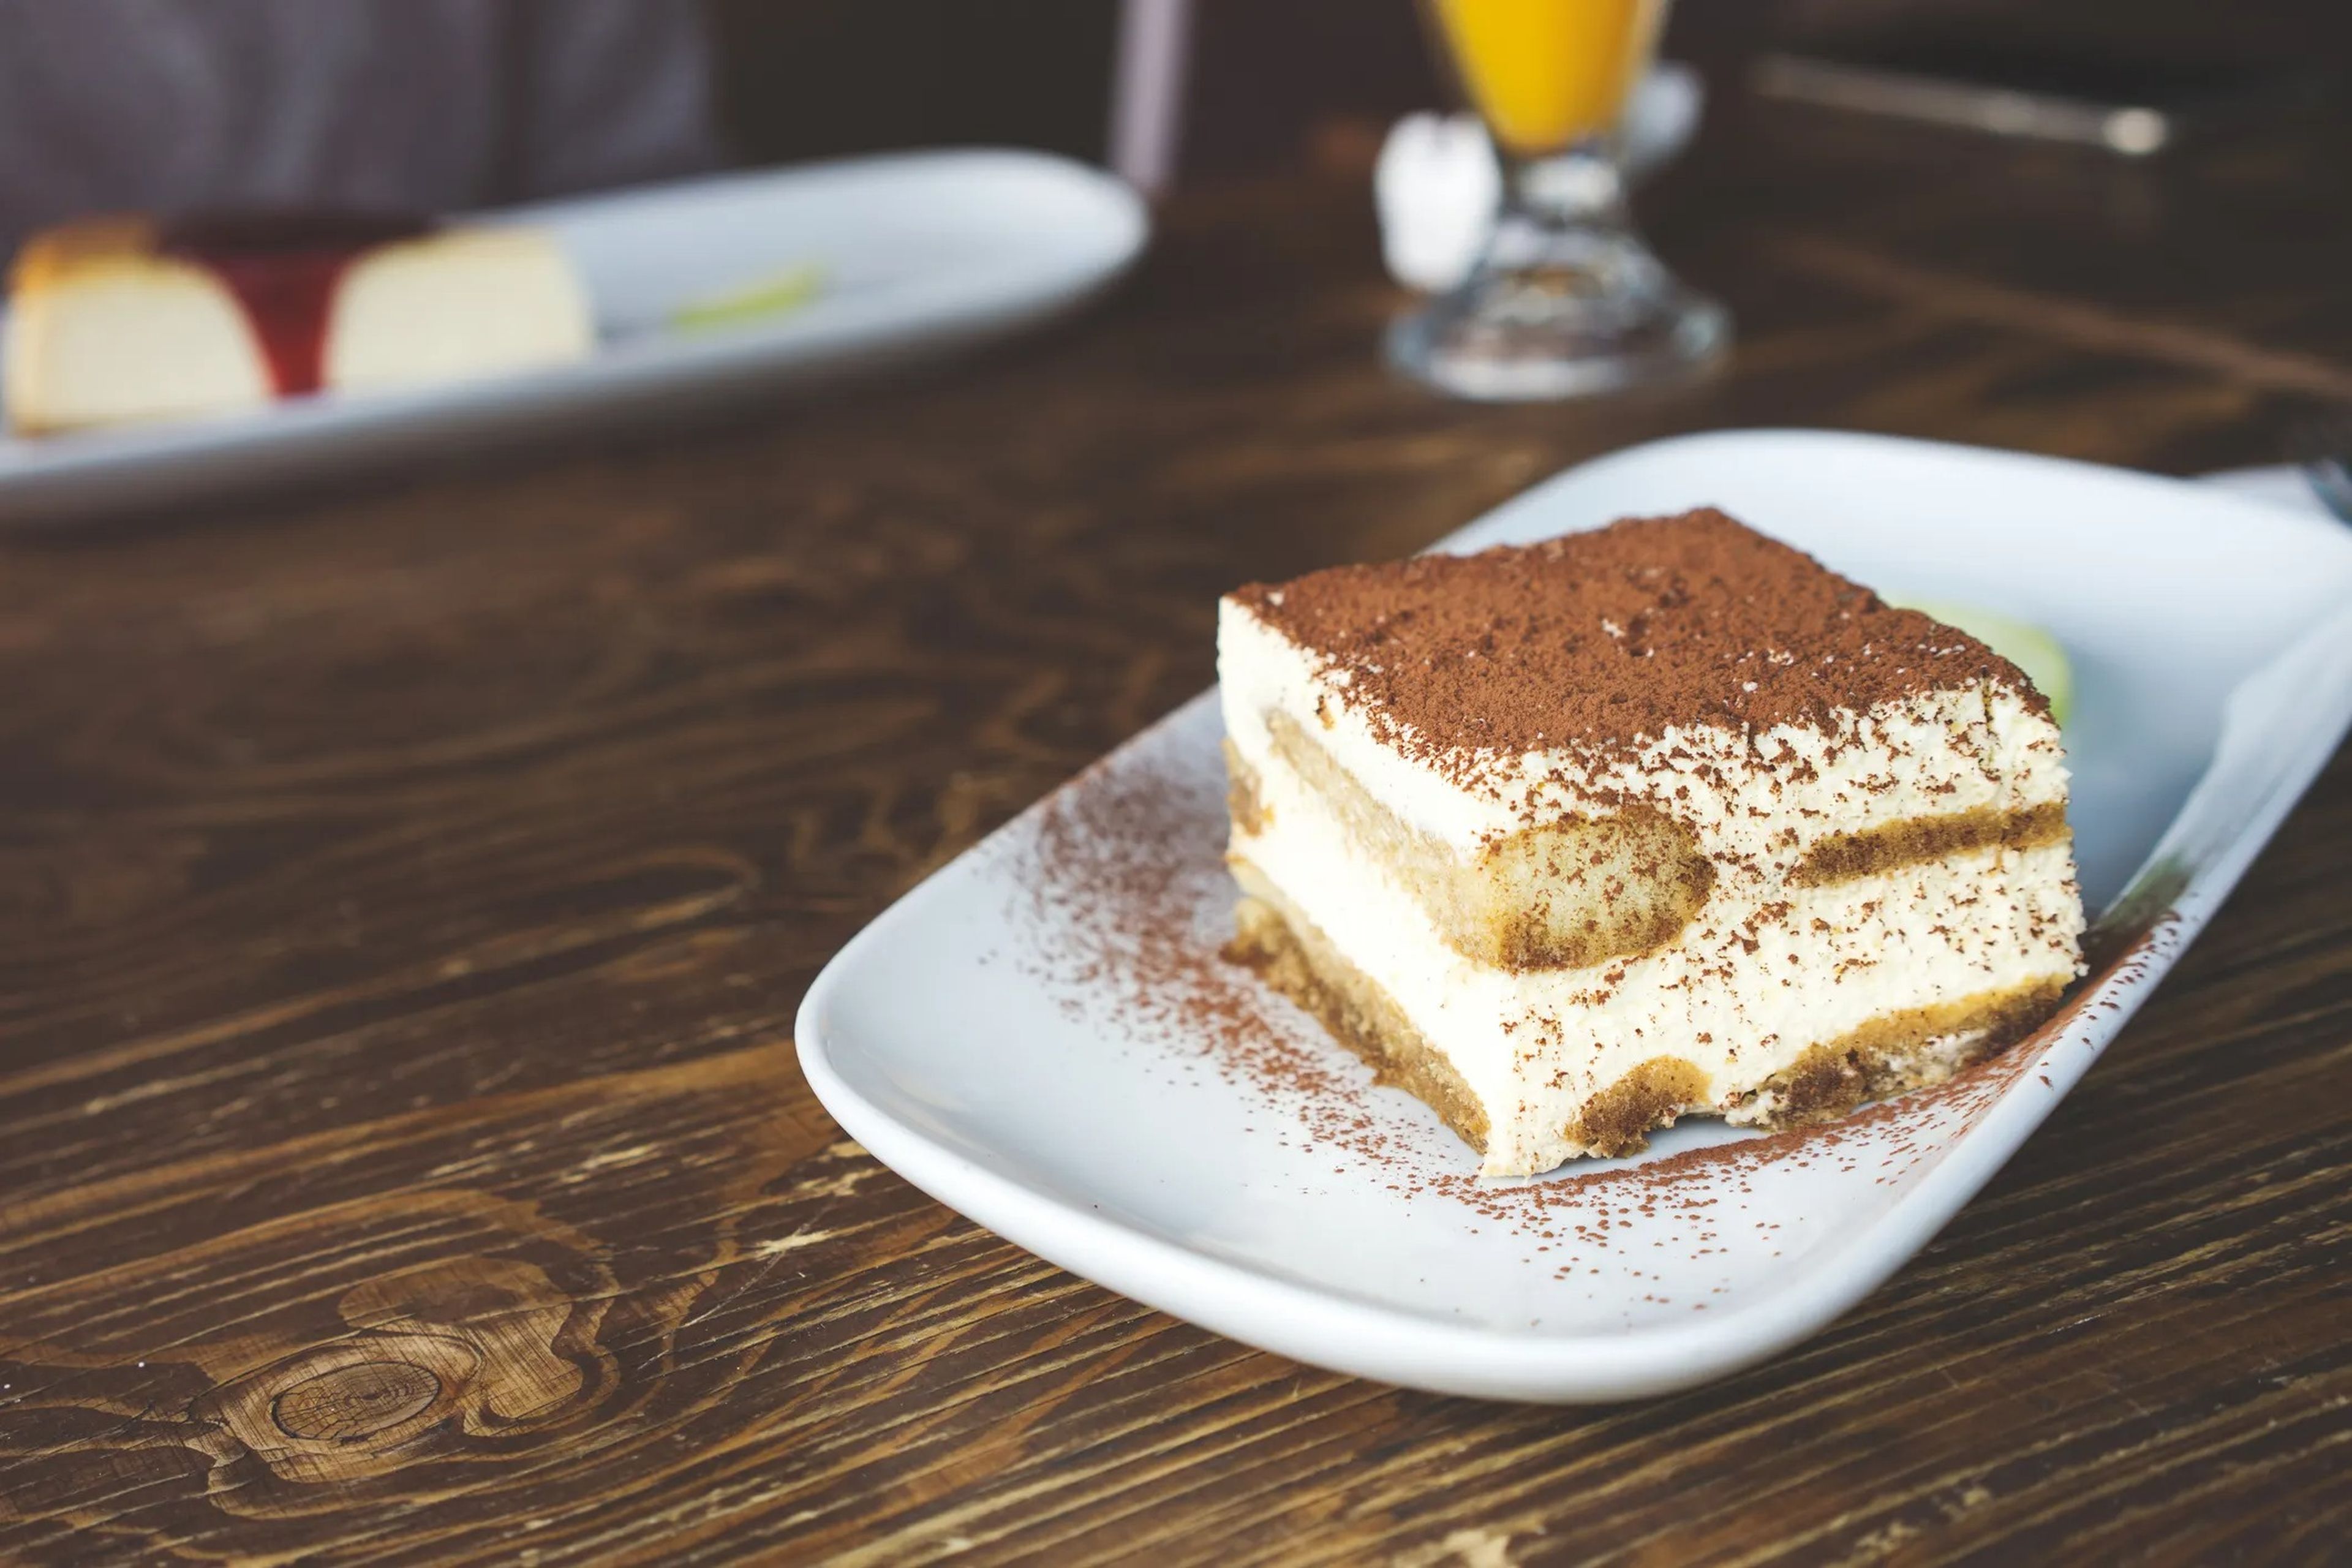 A stock image shows a plate of tiramisu, which typically contains mascarpone — an Italian cream cheese.